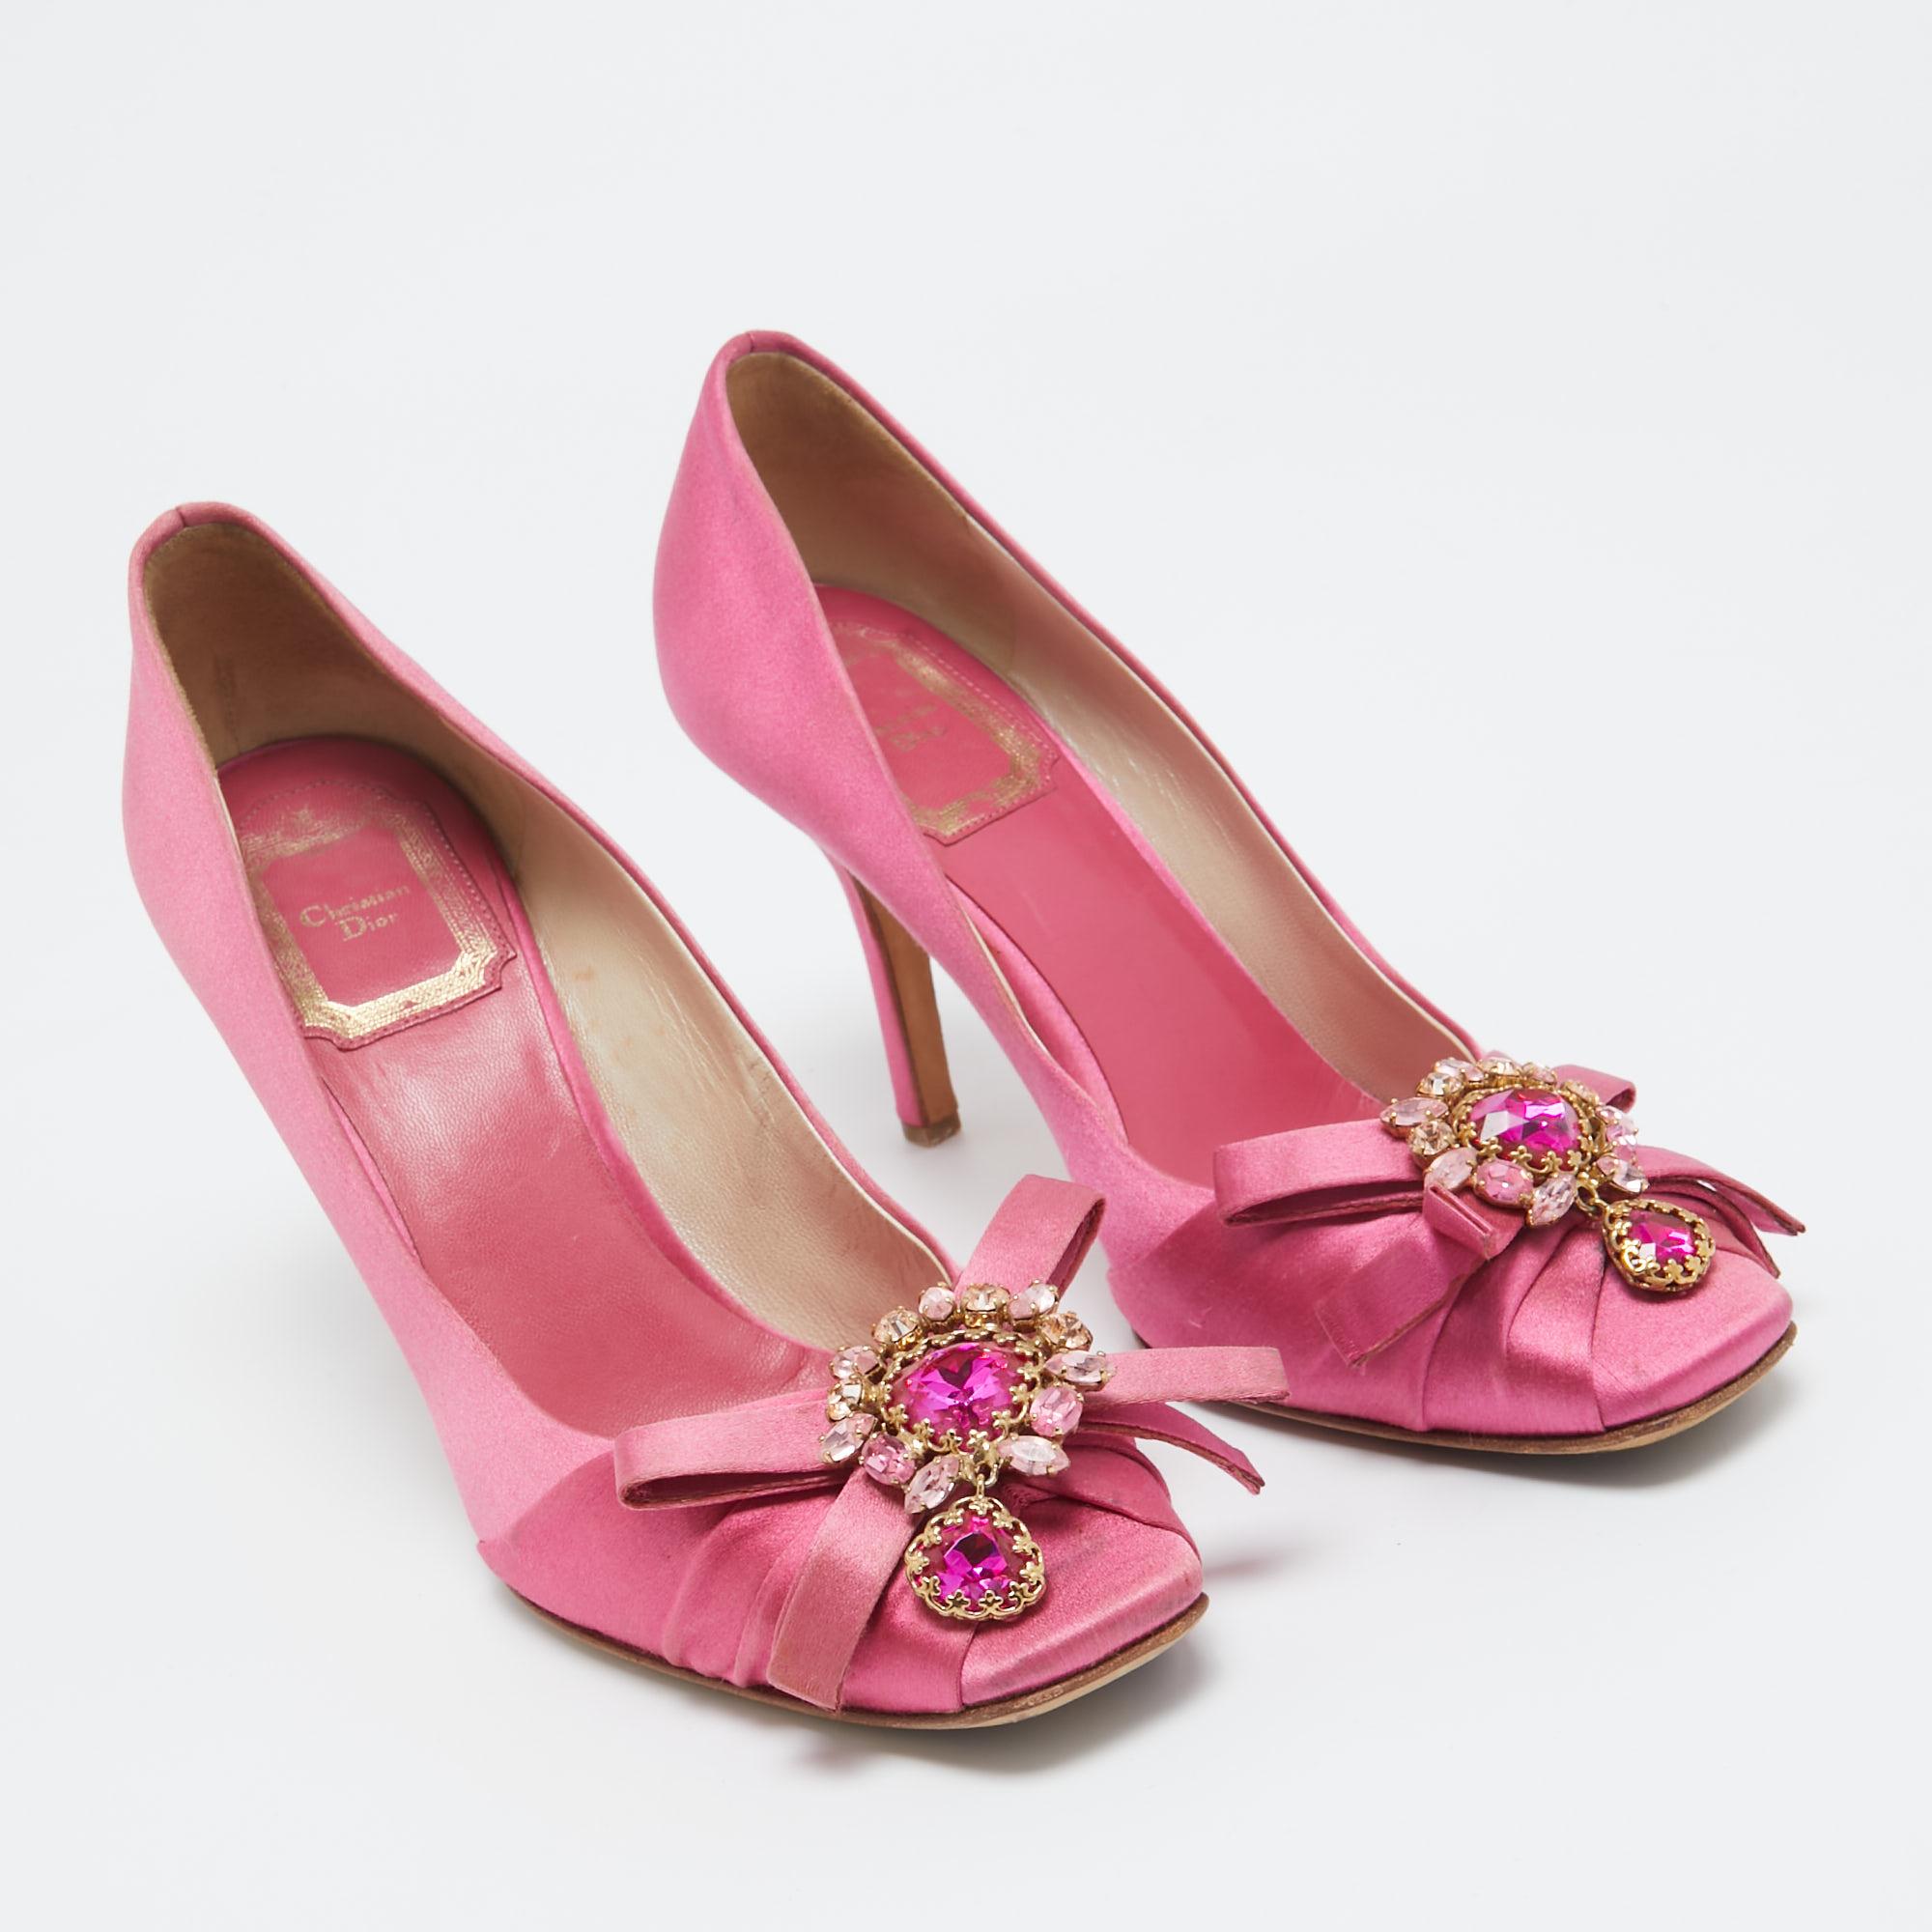 Dior Pink Satin Crystal Embellished Bow Pumps Size 36 In Good Condition For Sale In Dubai, Al Qouz 2